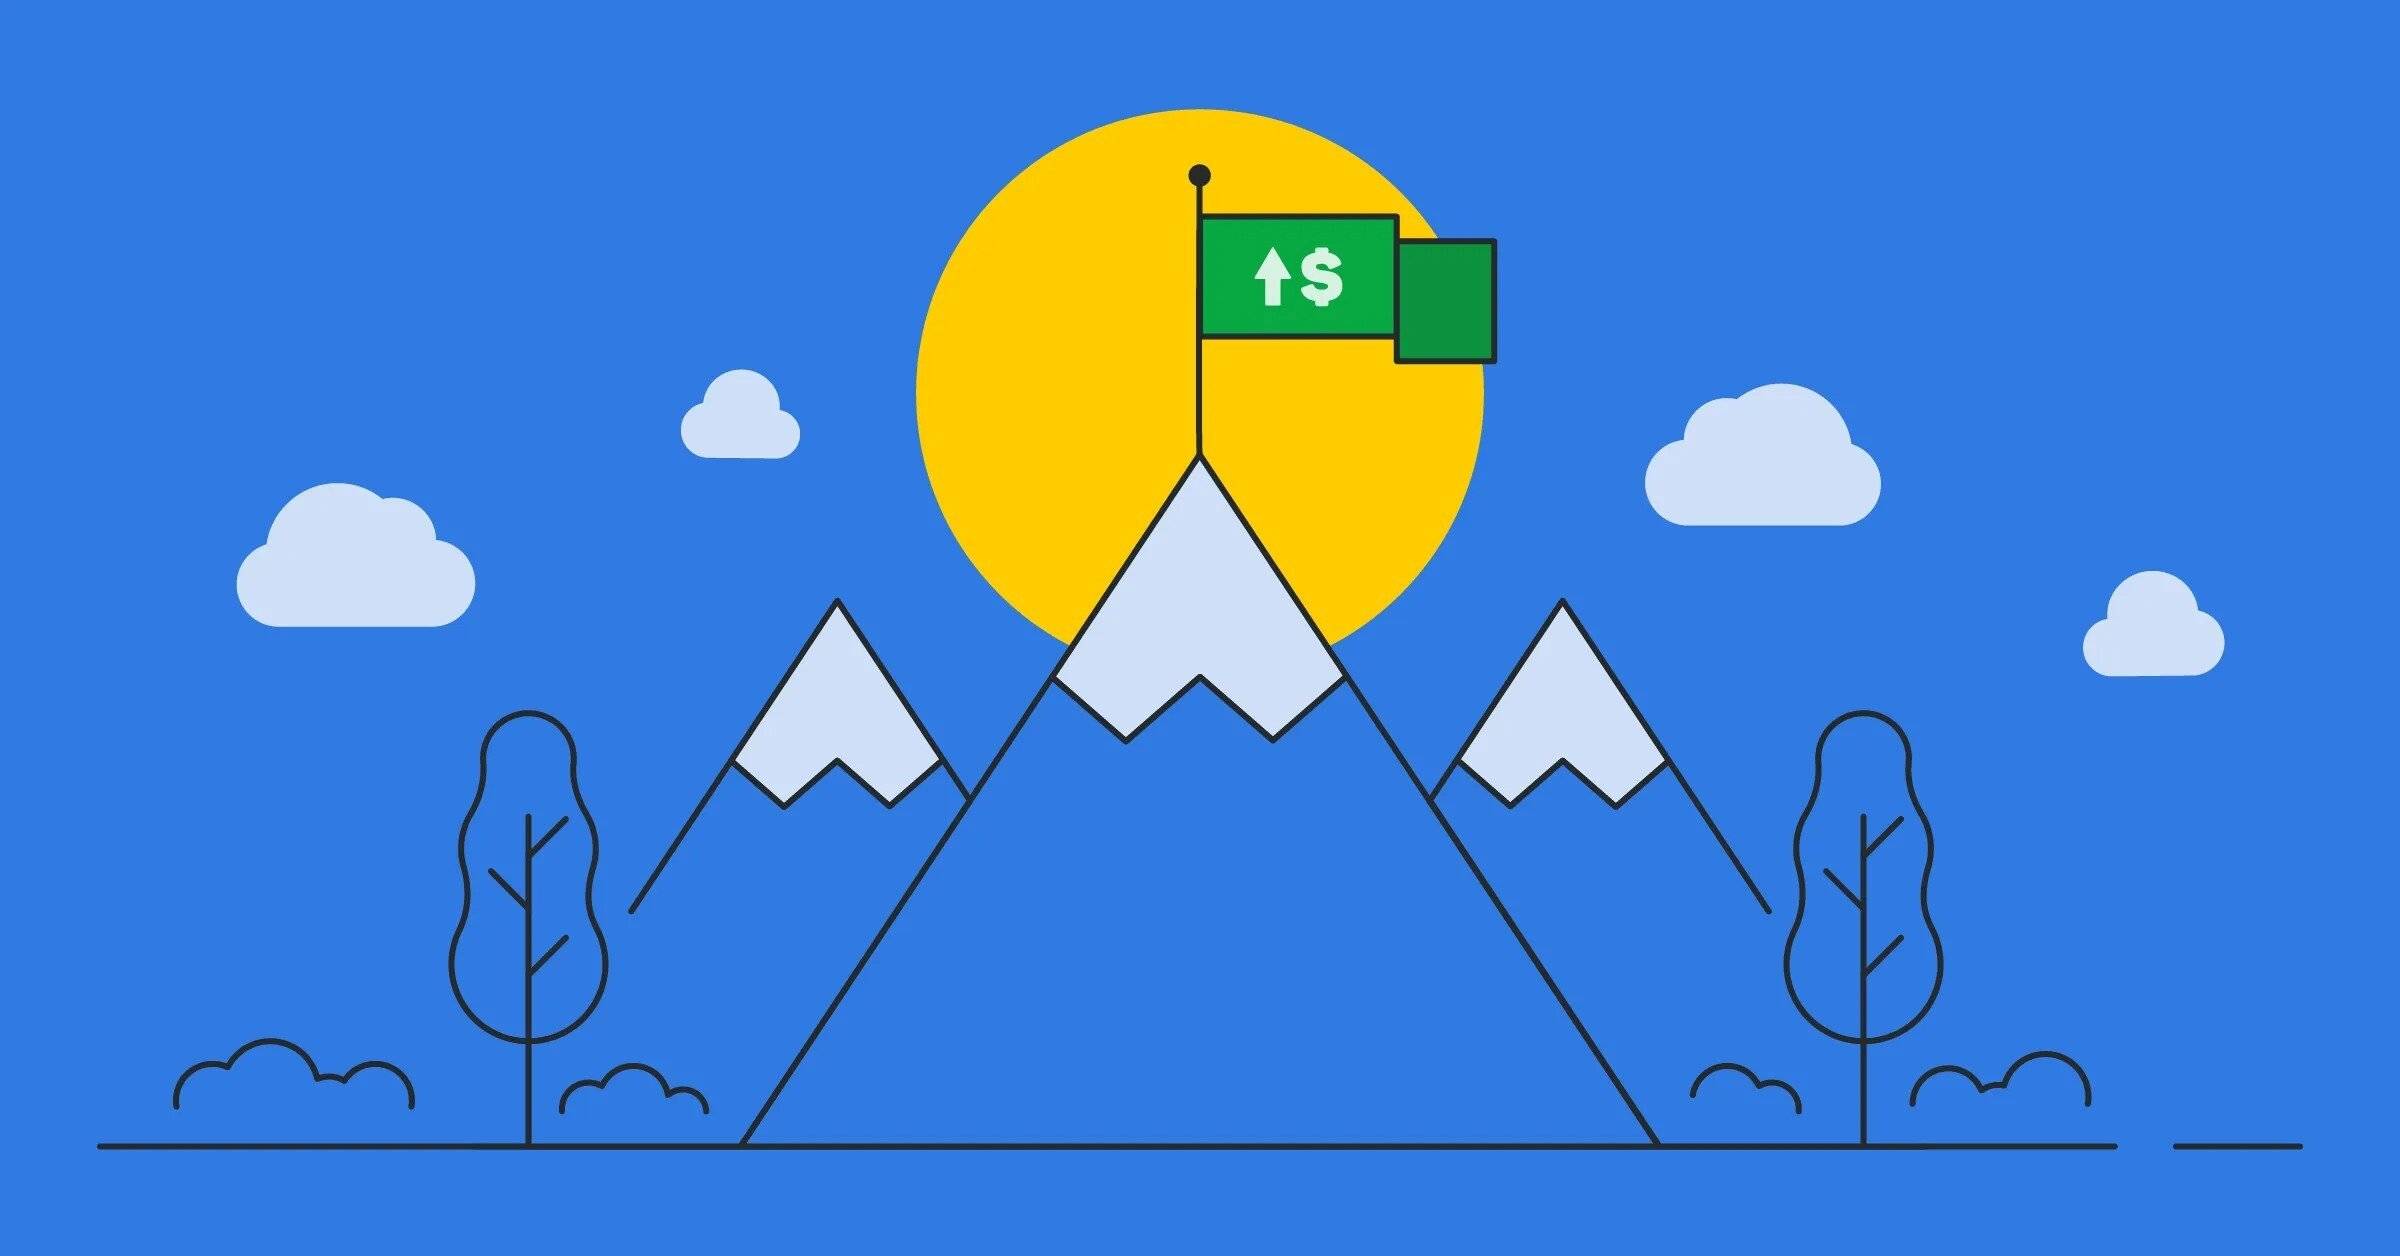 Mountain range with a green flag with a dollar sign on it.